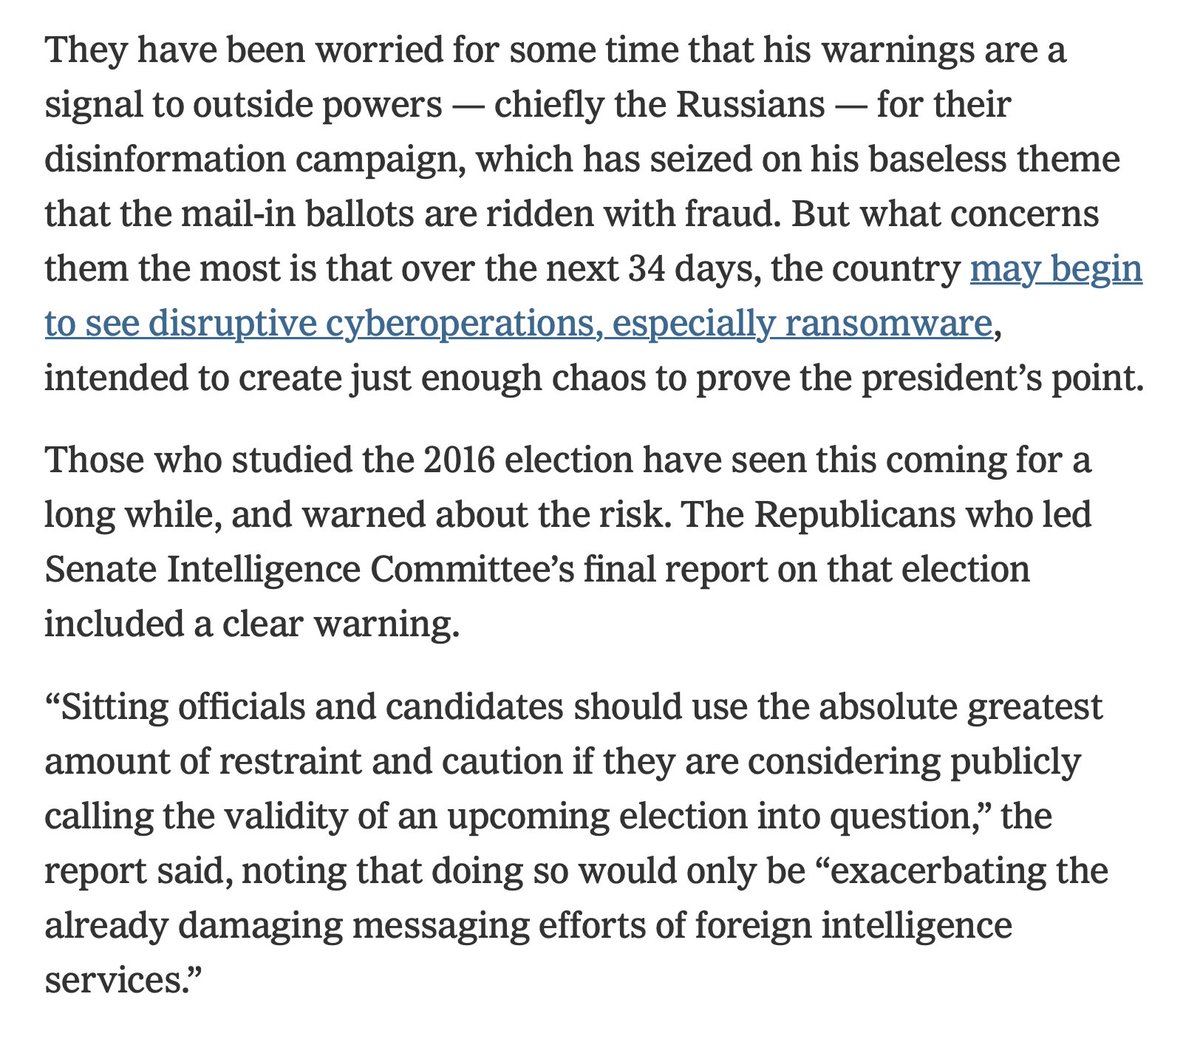 American intelligence and homeland security officials are worried the President of the United States is signaling foreign powers to interfere in our elections on his behalf.  https://www.nytimes.com/2020/09/30/us/politics/trump-debate-election.htmlA democratic emergency.